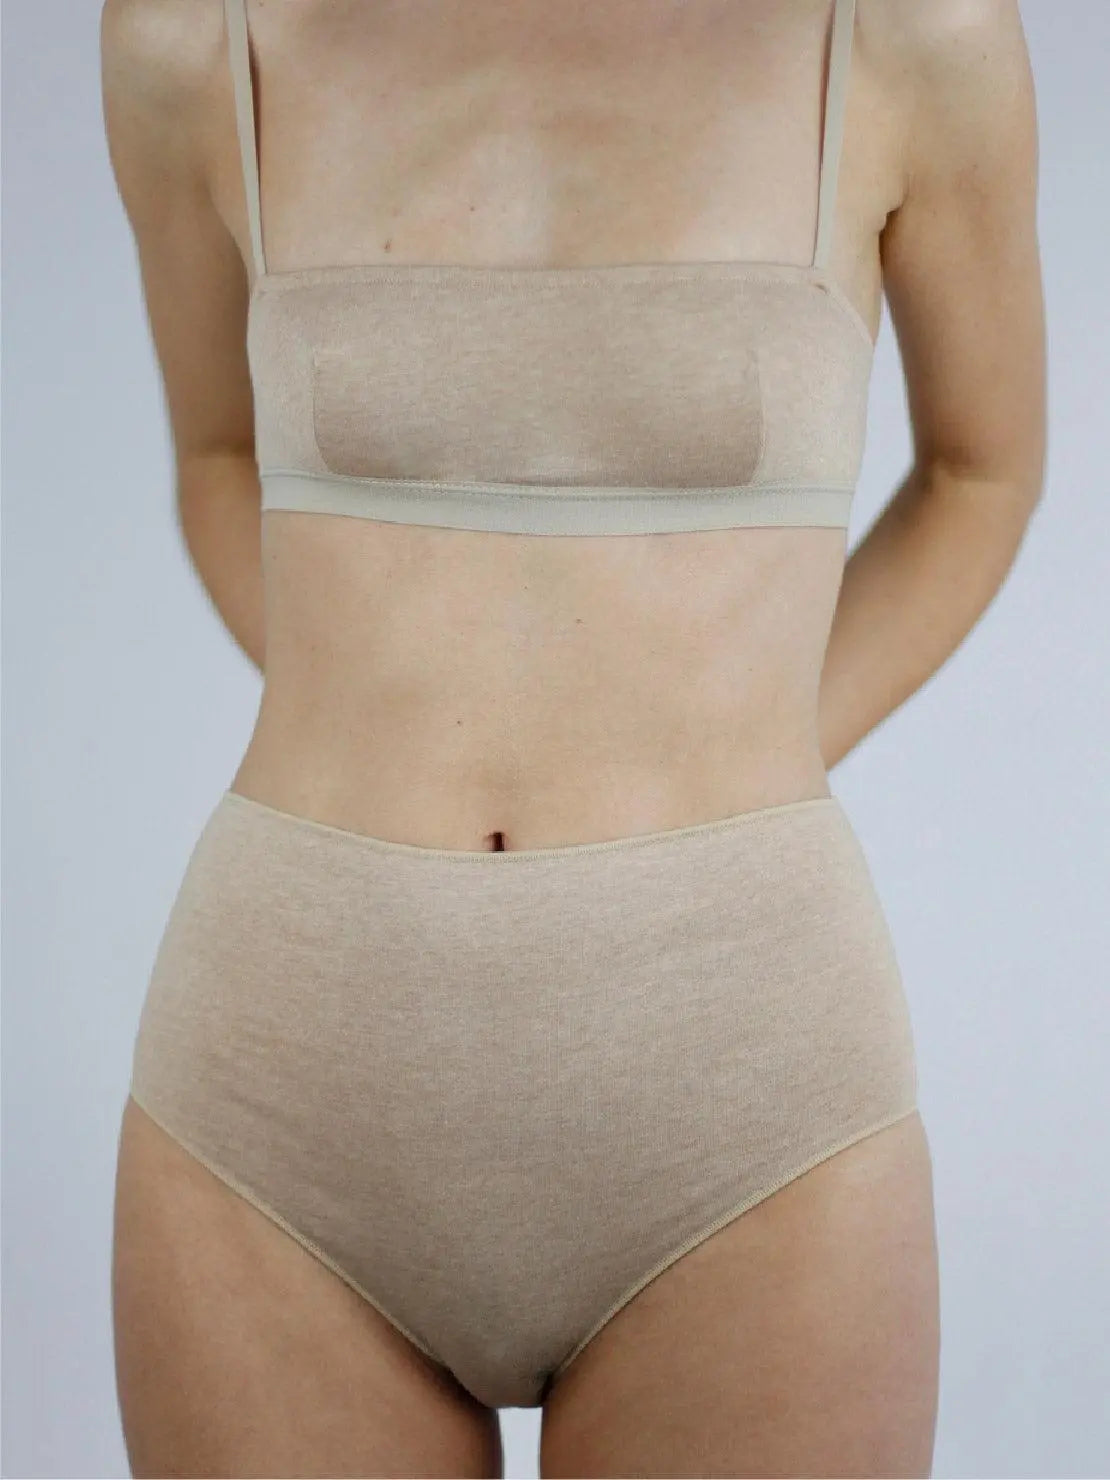 A person wearing a matching beige bra and Earth Basic Highwaist Organic Cotton Briefs from Talk Under Light stands against a plain white background. The focus is on the person's torso, highlighting the comfortable and seamless fit of the undergarments available at this trendy store in Barcelona.